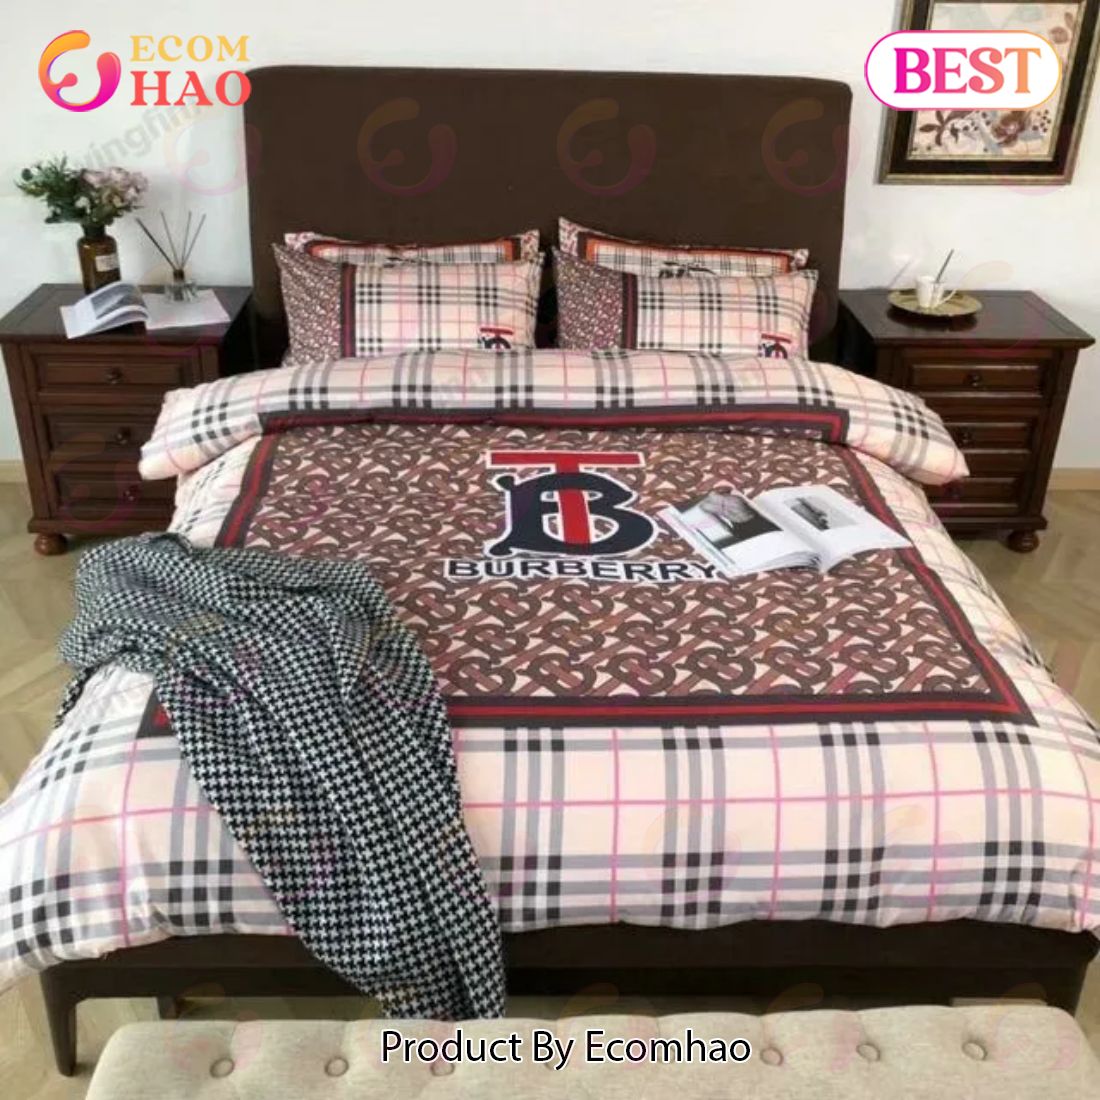 Burberry Bedding Sets Quilt Sets Duvet Cover Luxury Brand Bedding Decor Bedroom Sets Best Luxury Bed Sets Gift Thankgivings And Christmas